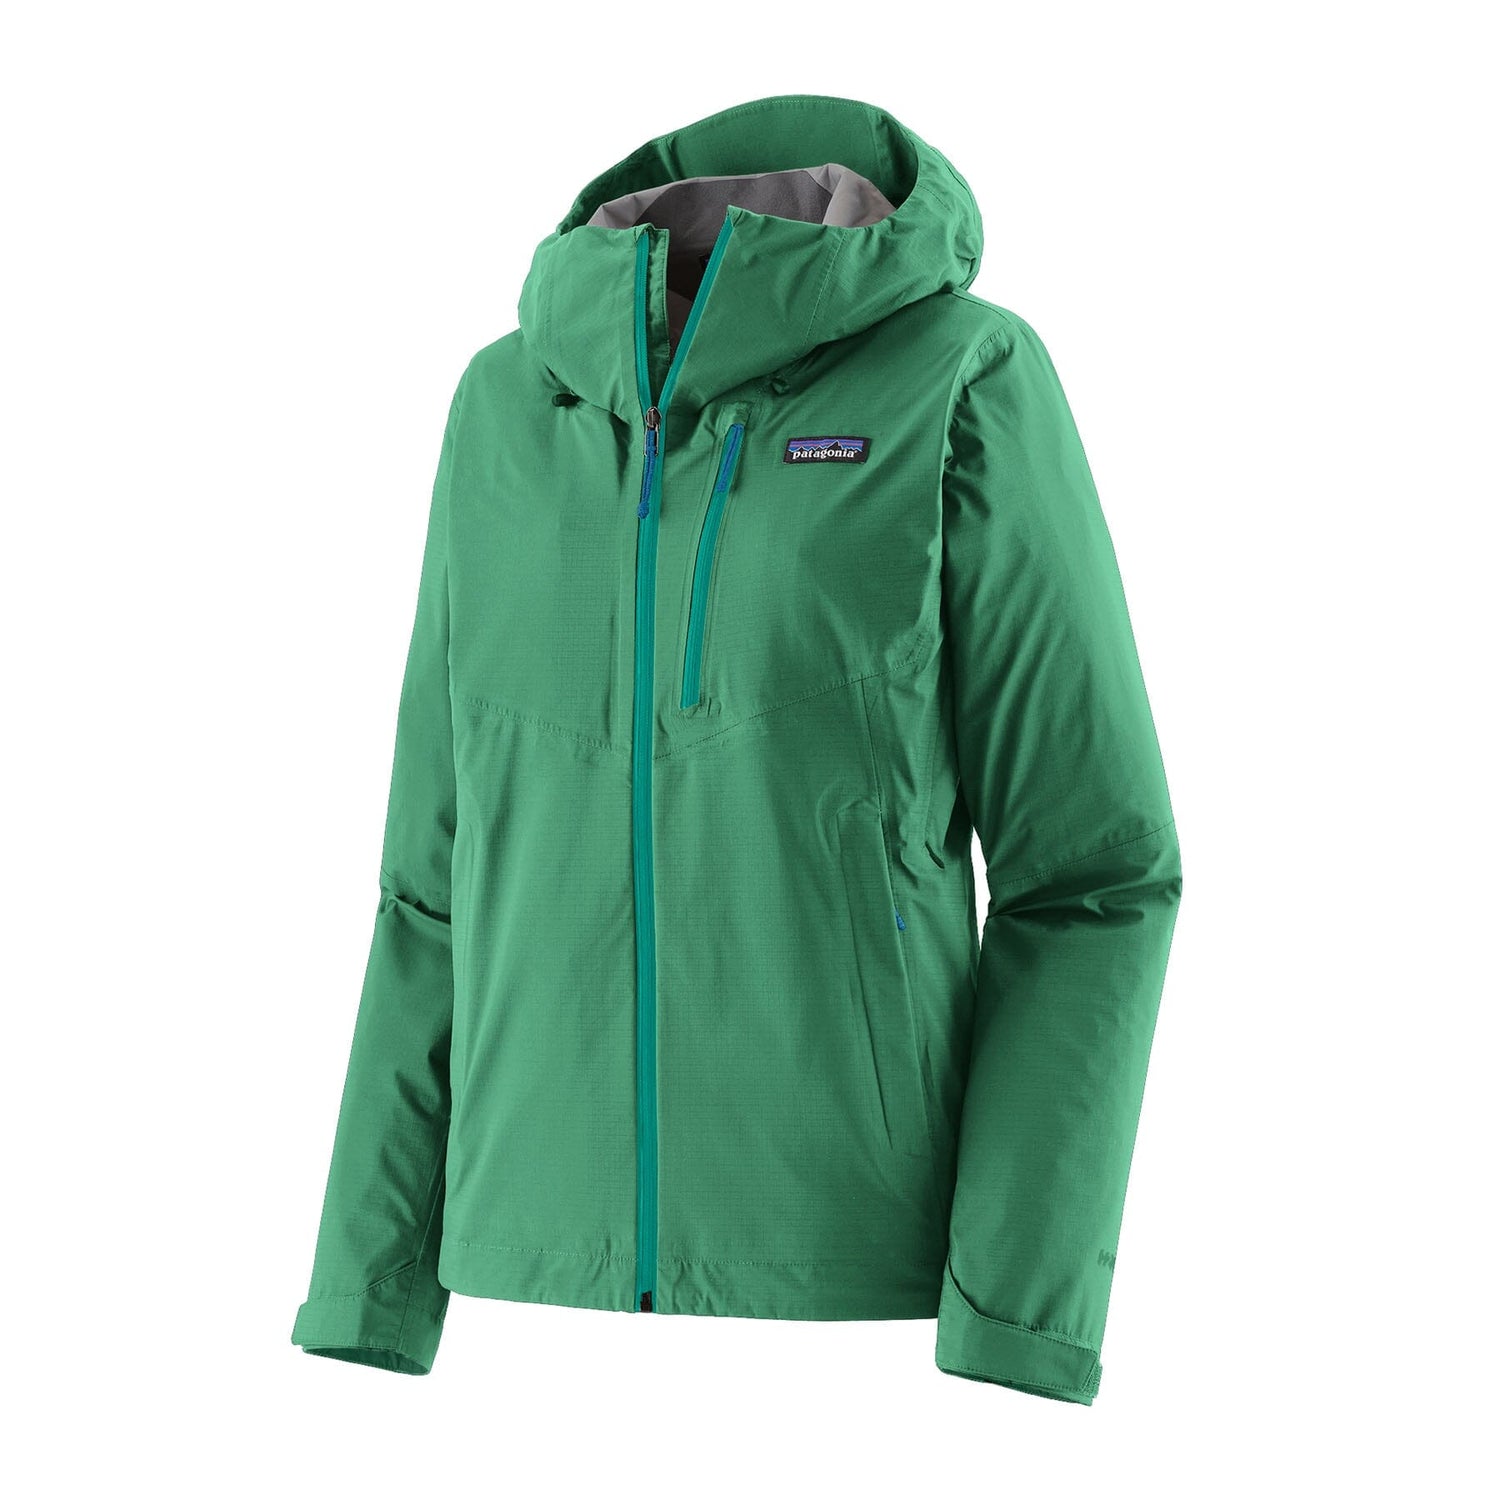 Patagonia W's Granite Crest Shell Jacket - 100% Recycled Nylon Gather Green Jacket